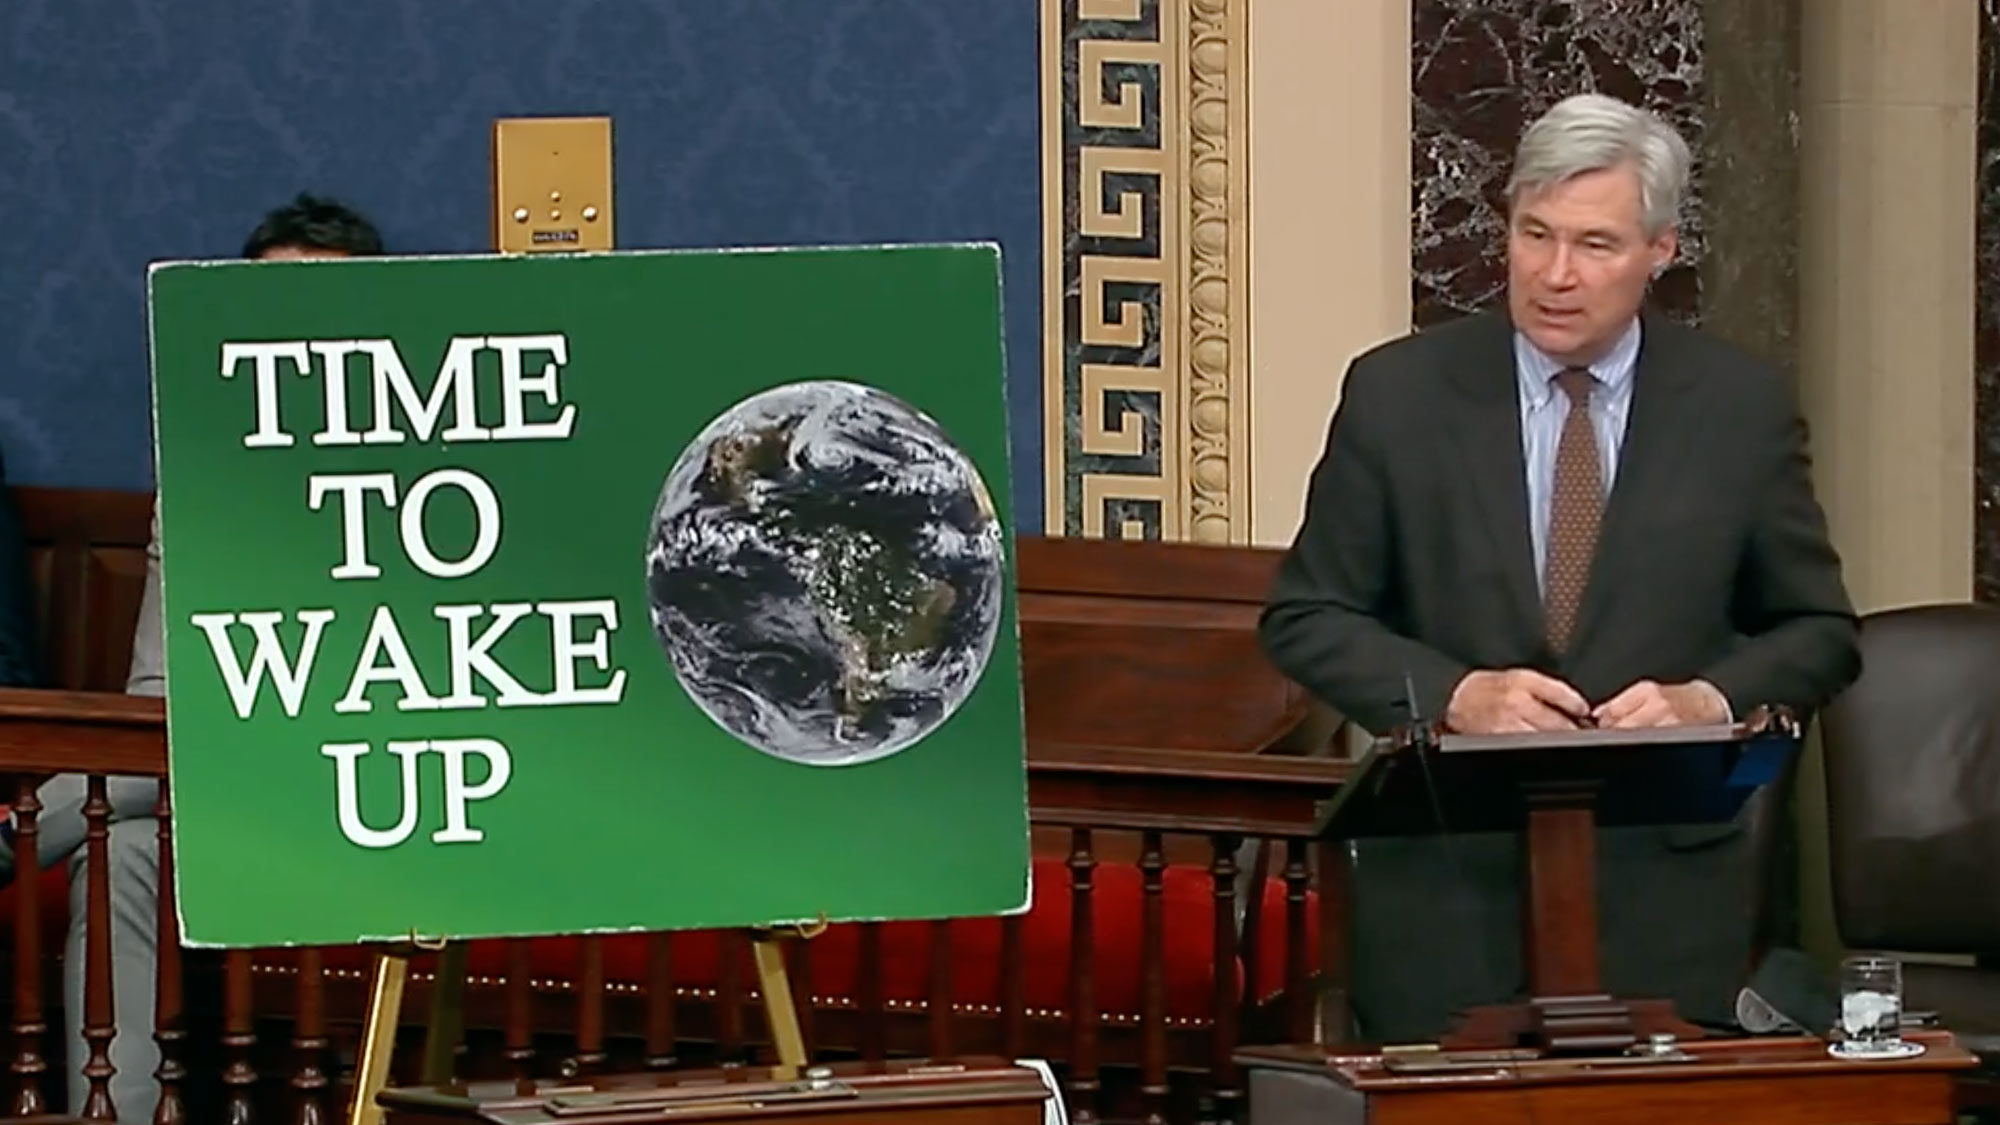 Senator Sheldon Whitehouse stands next to a green sign with a globe and the words 